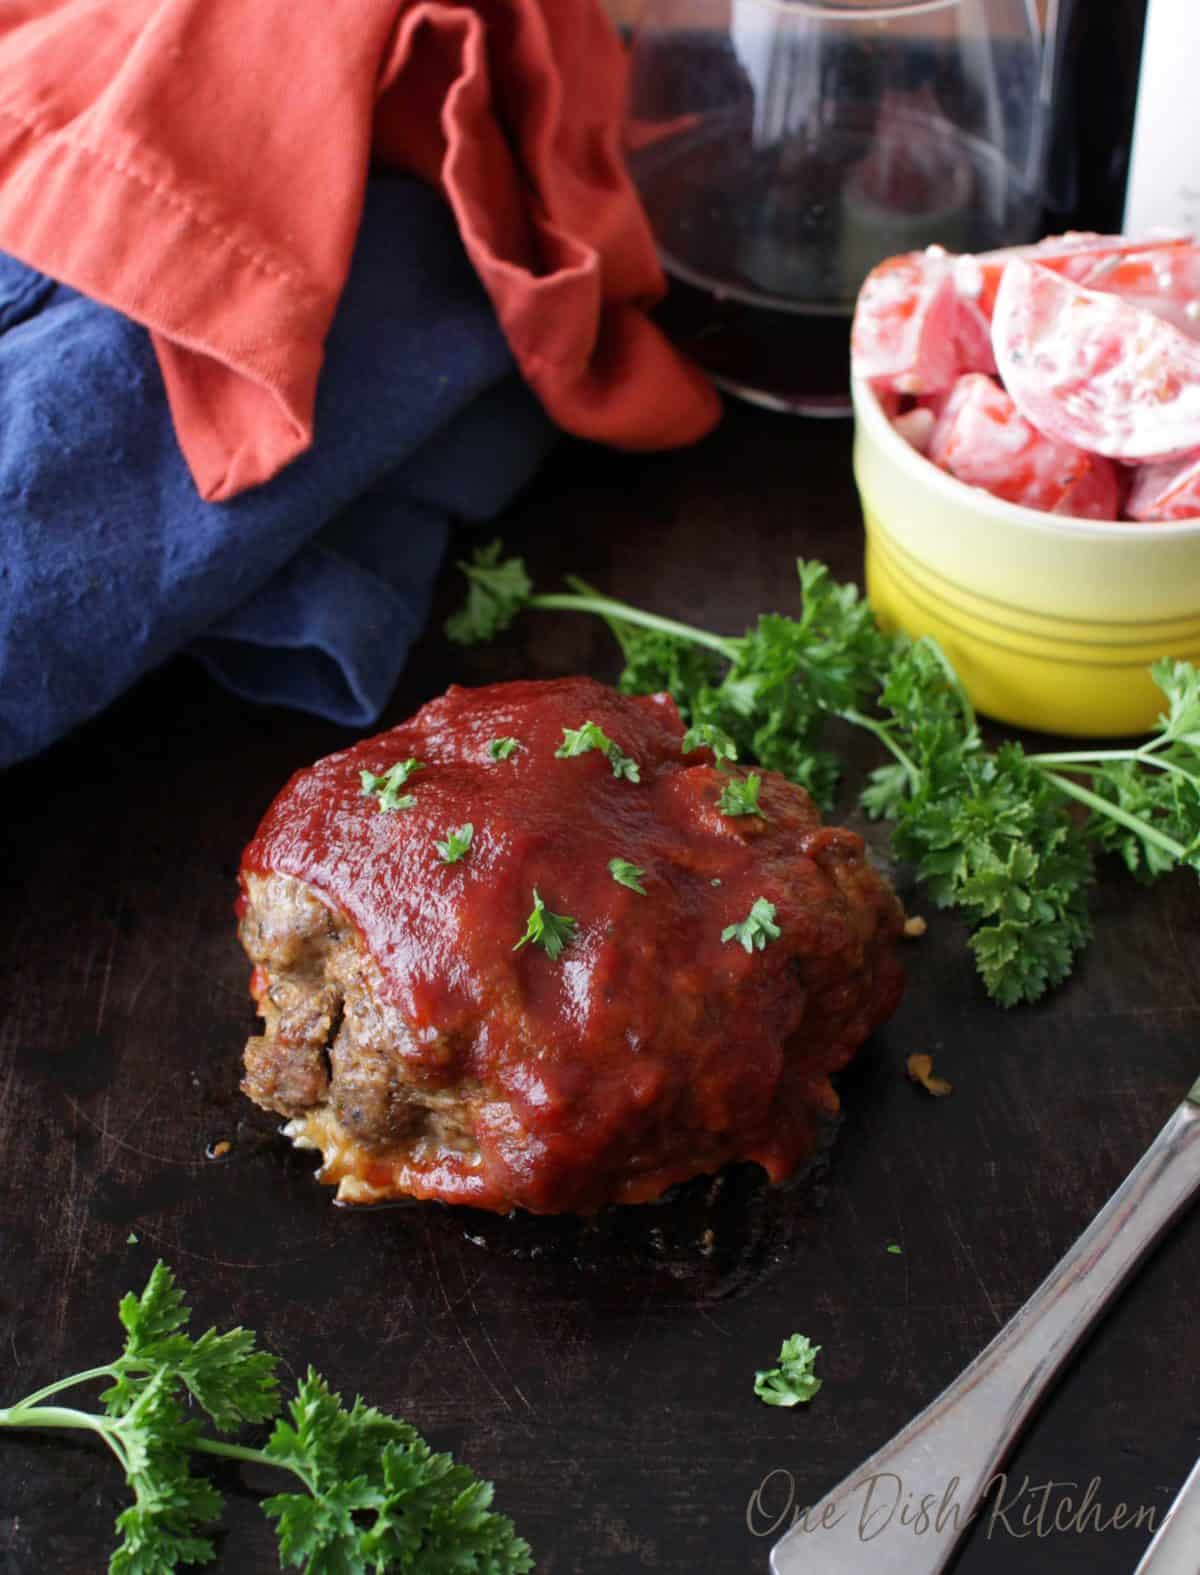 A single serving of meatloaf on a dark wooden tray with a glass of red wine and a small bowl of tomato slices with ranch dressing.